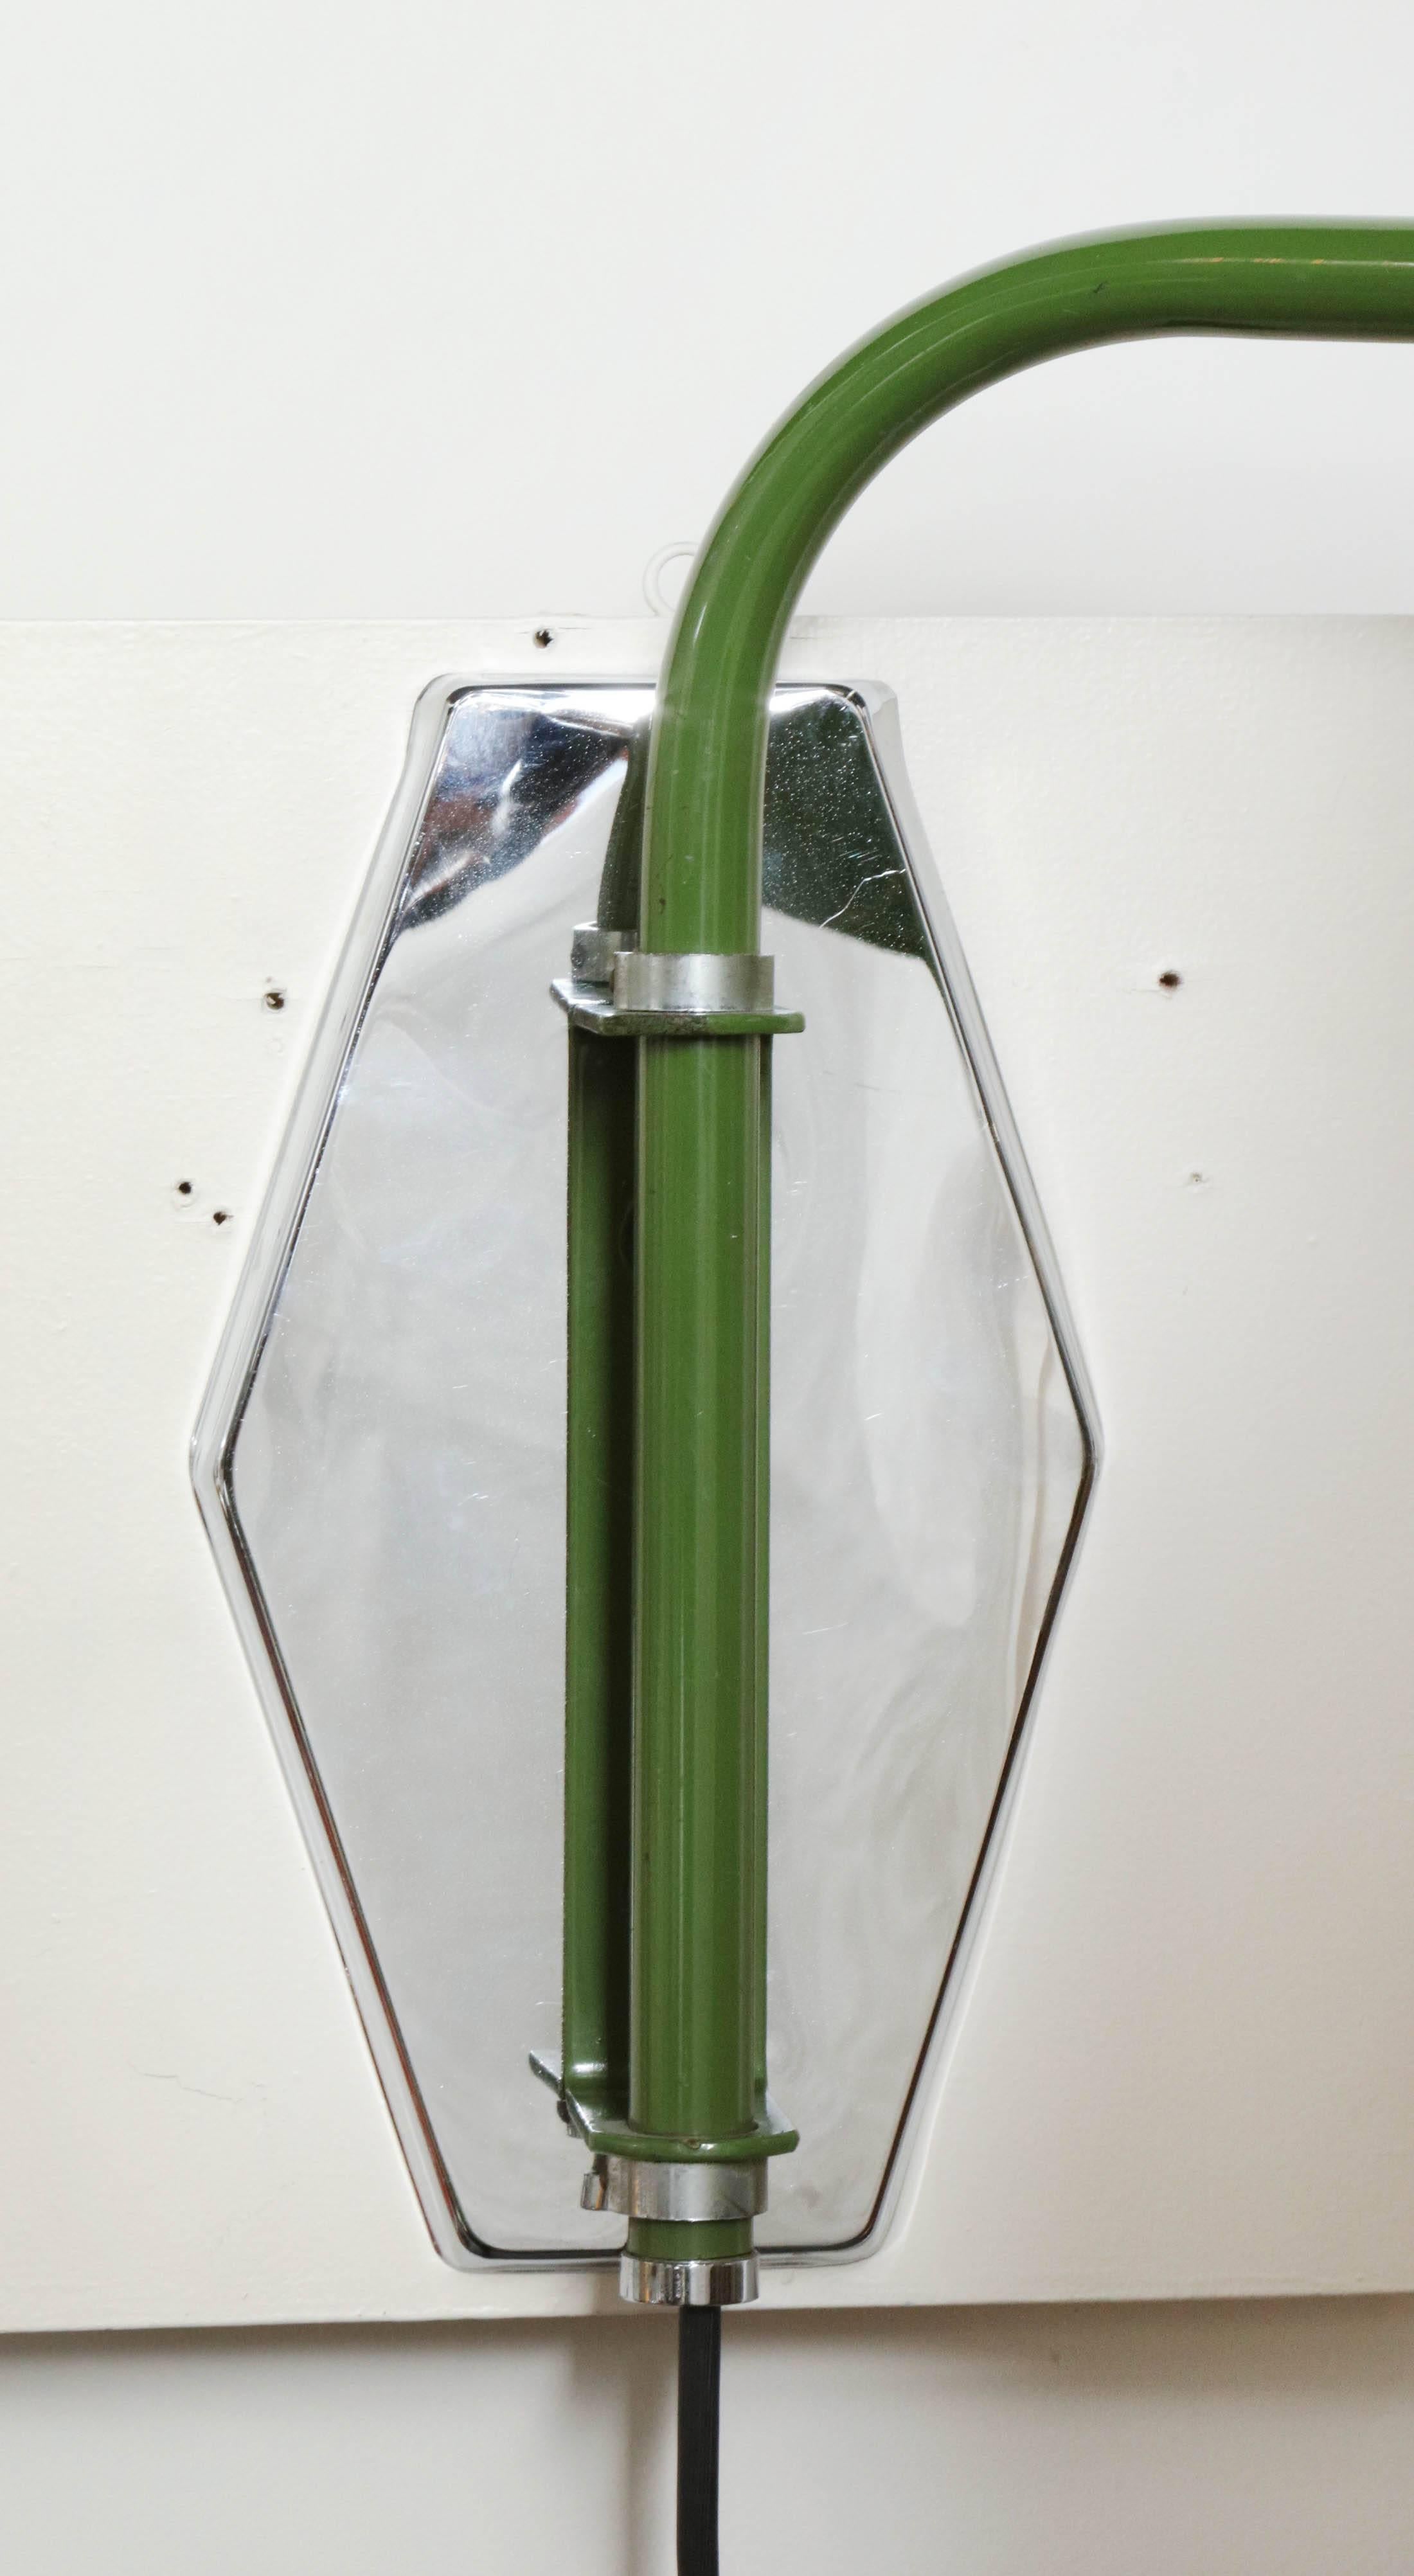 Mid-20th Century Bormann Wall Light Made by the Bauhaus in Germany 1930 For Sale